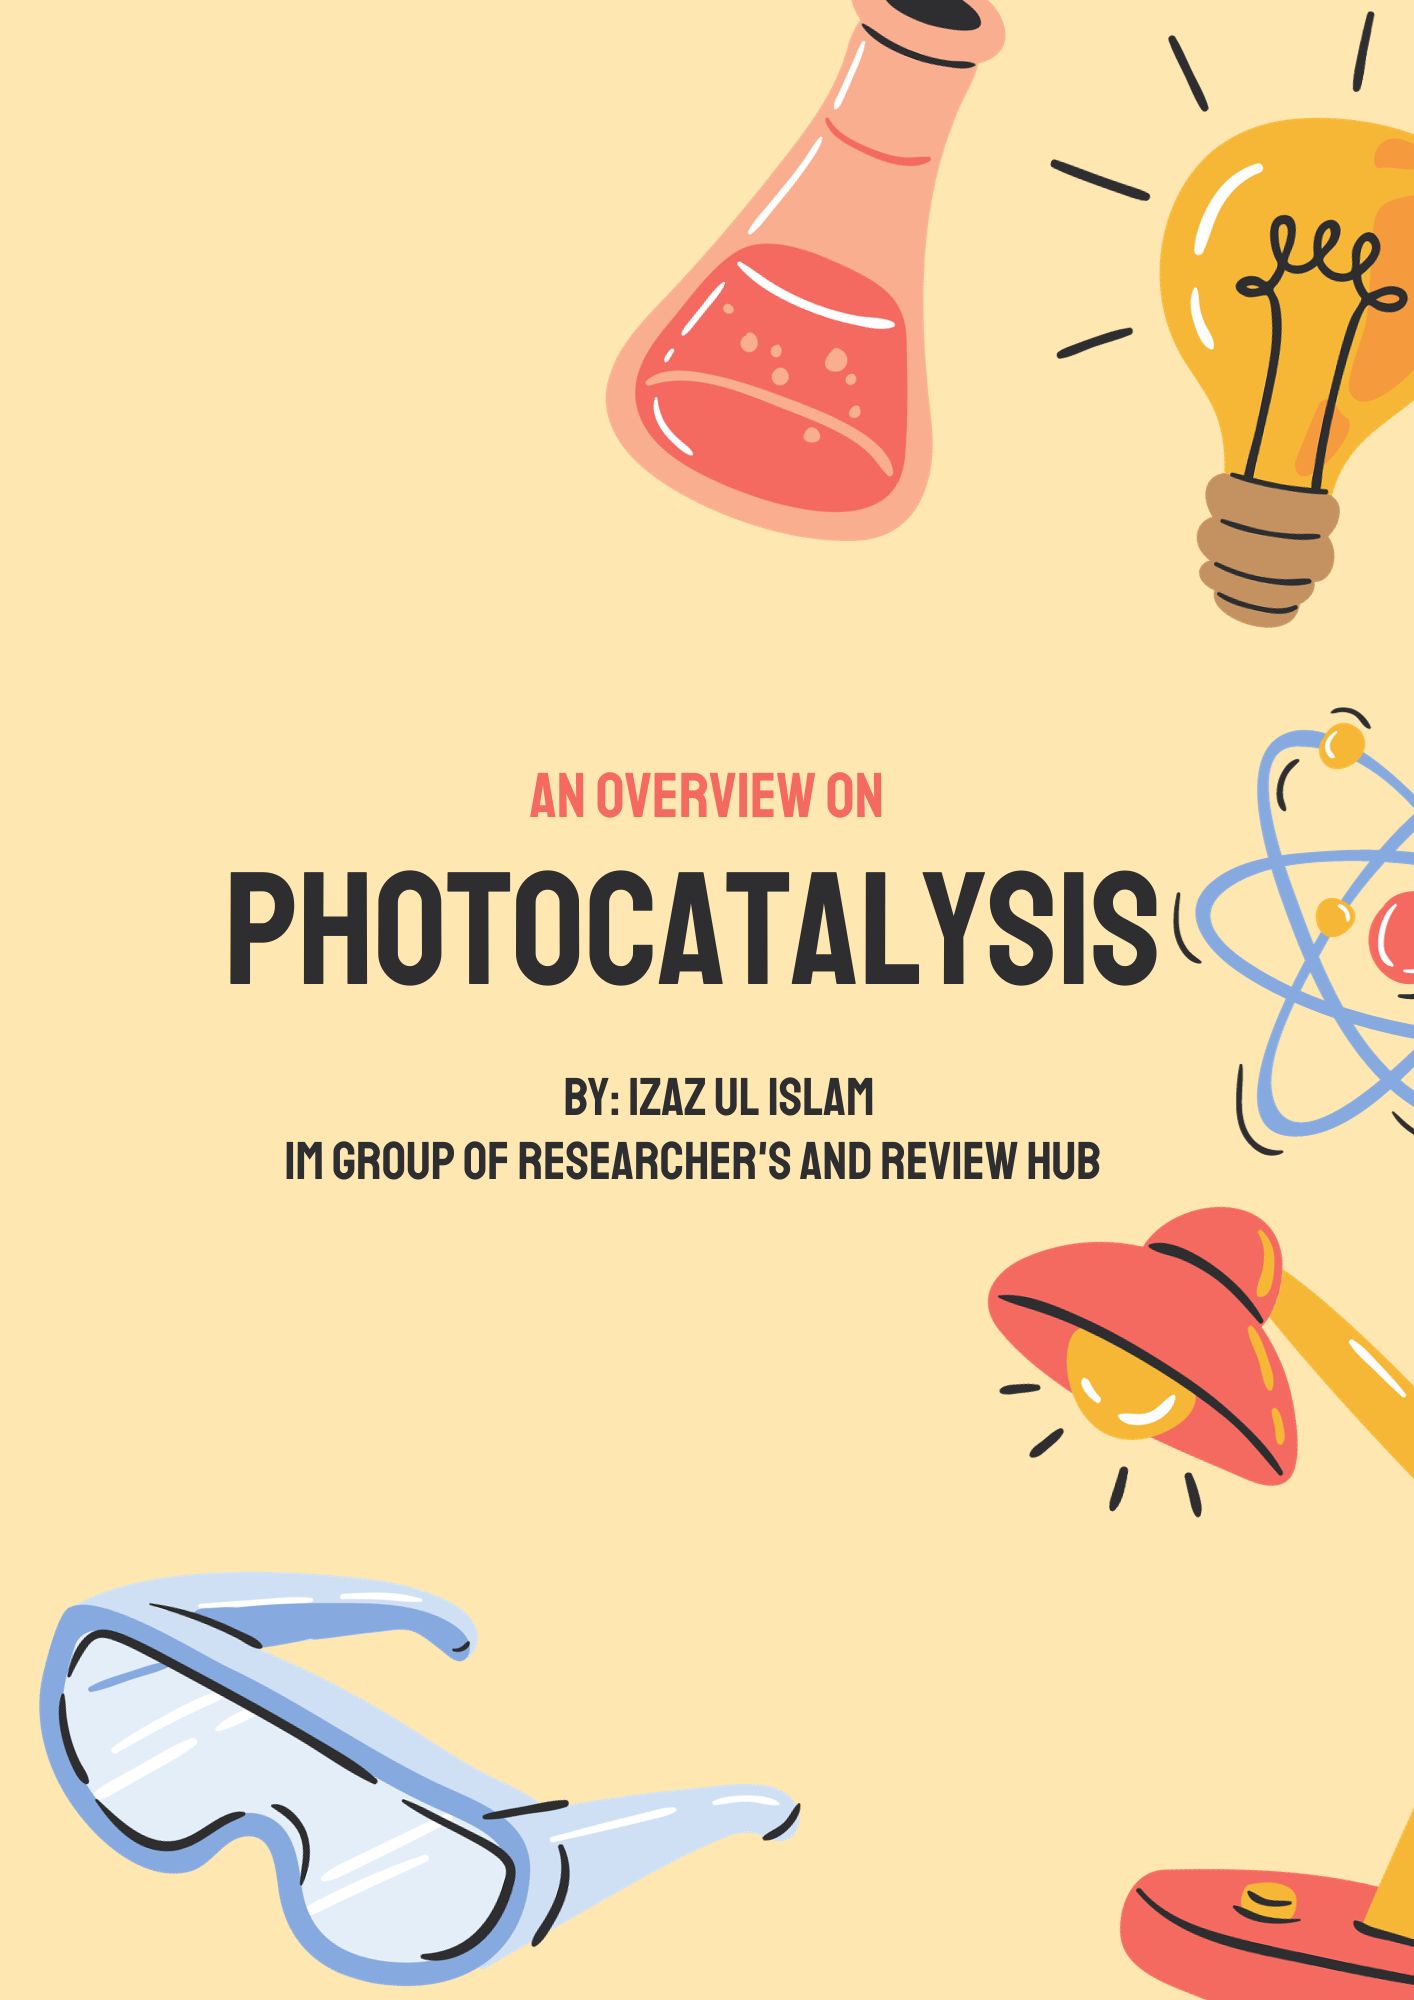 An Overview on Photocatalysis